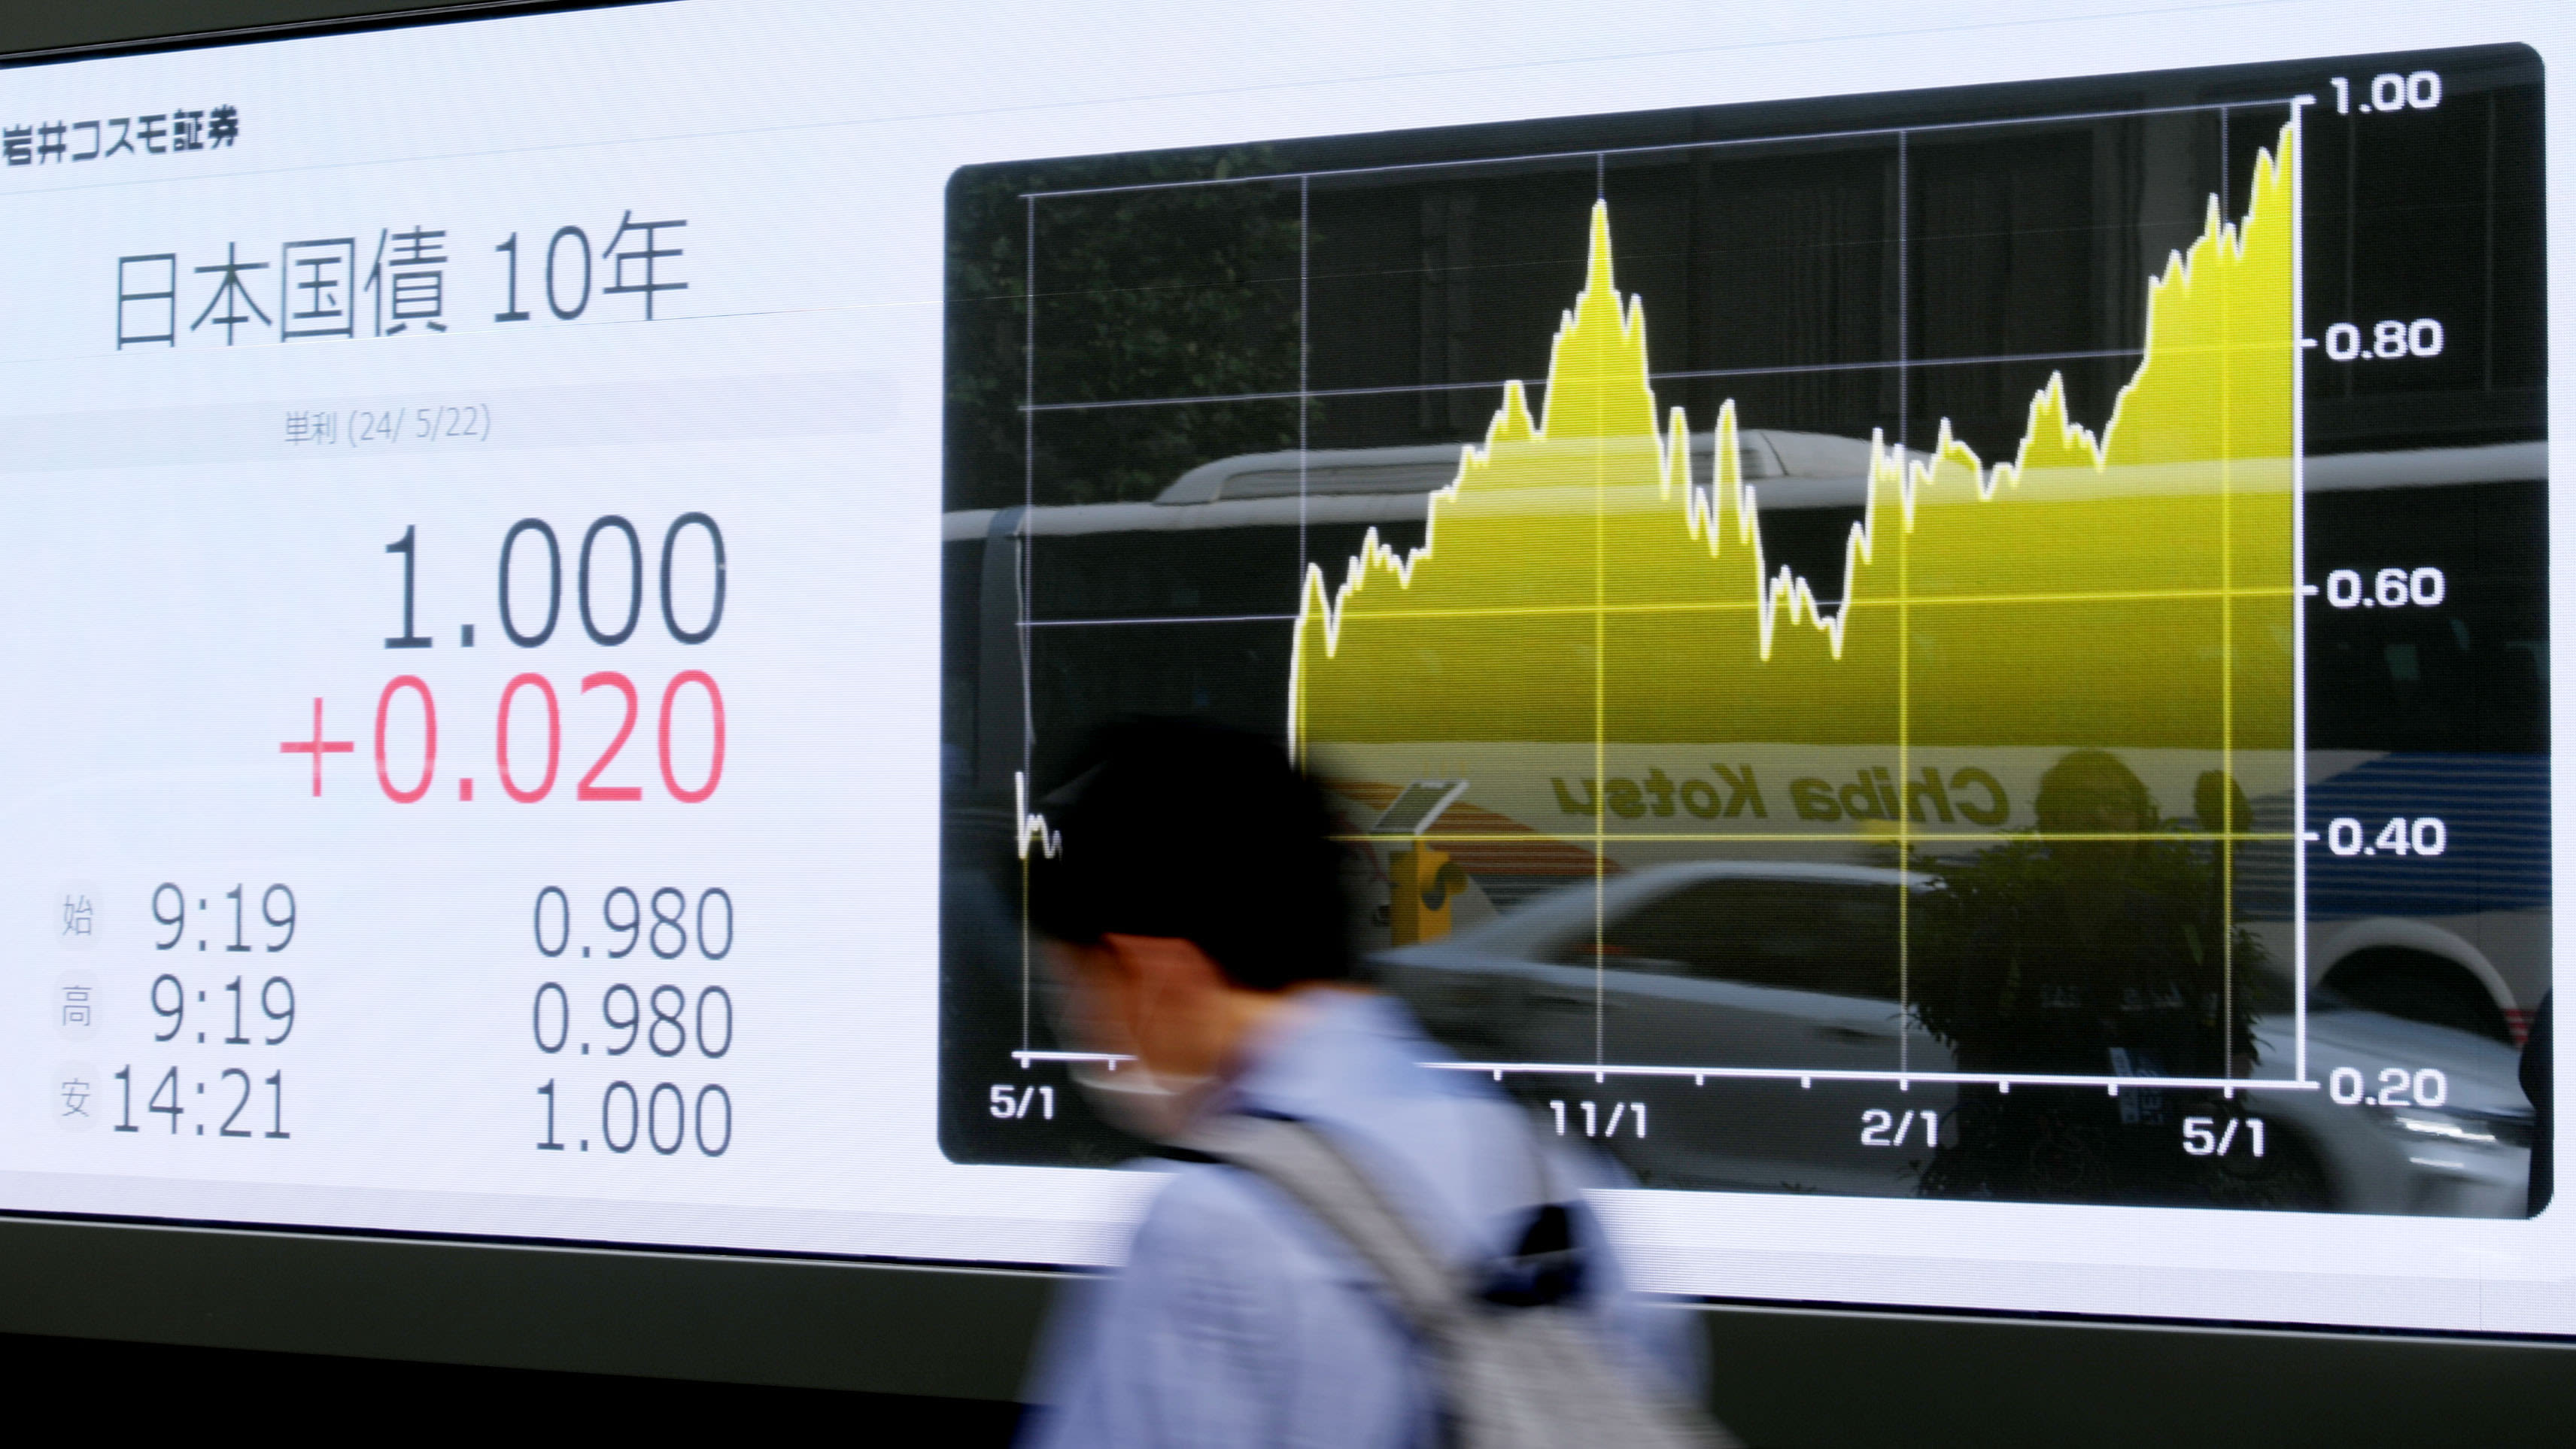 Japan's 10-year government bond yield hits 1% for first time in 11 years